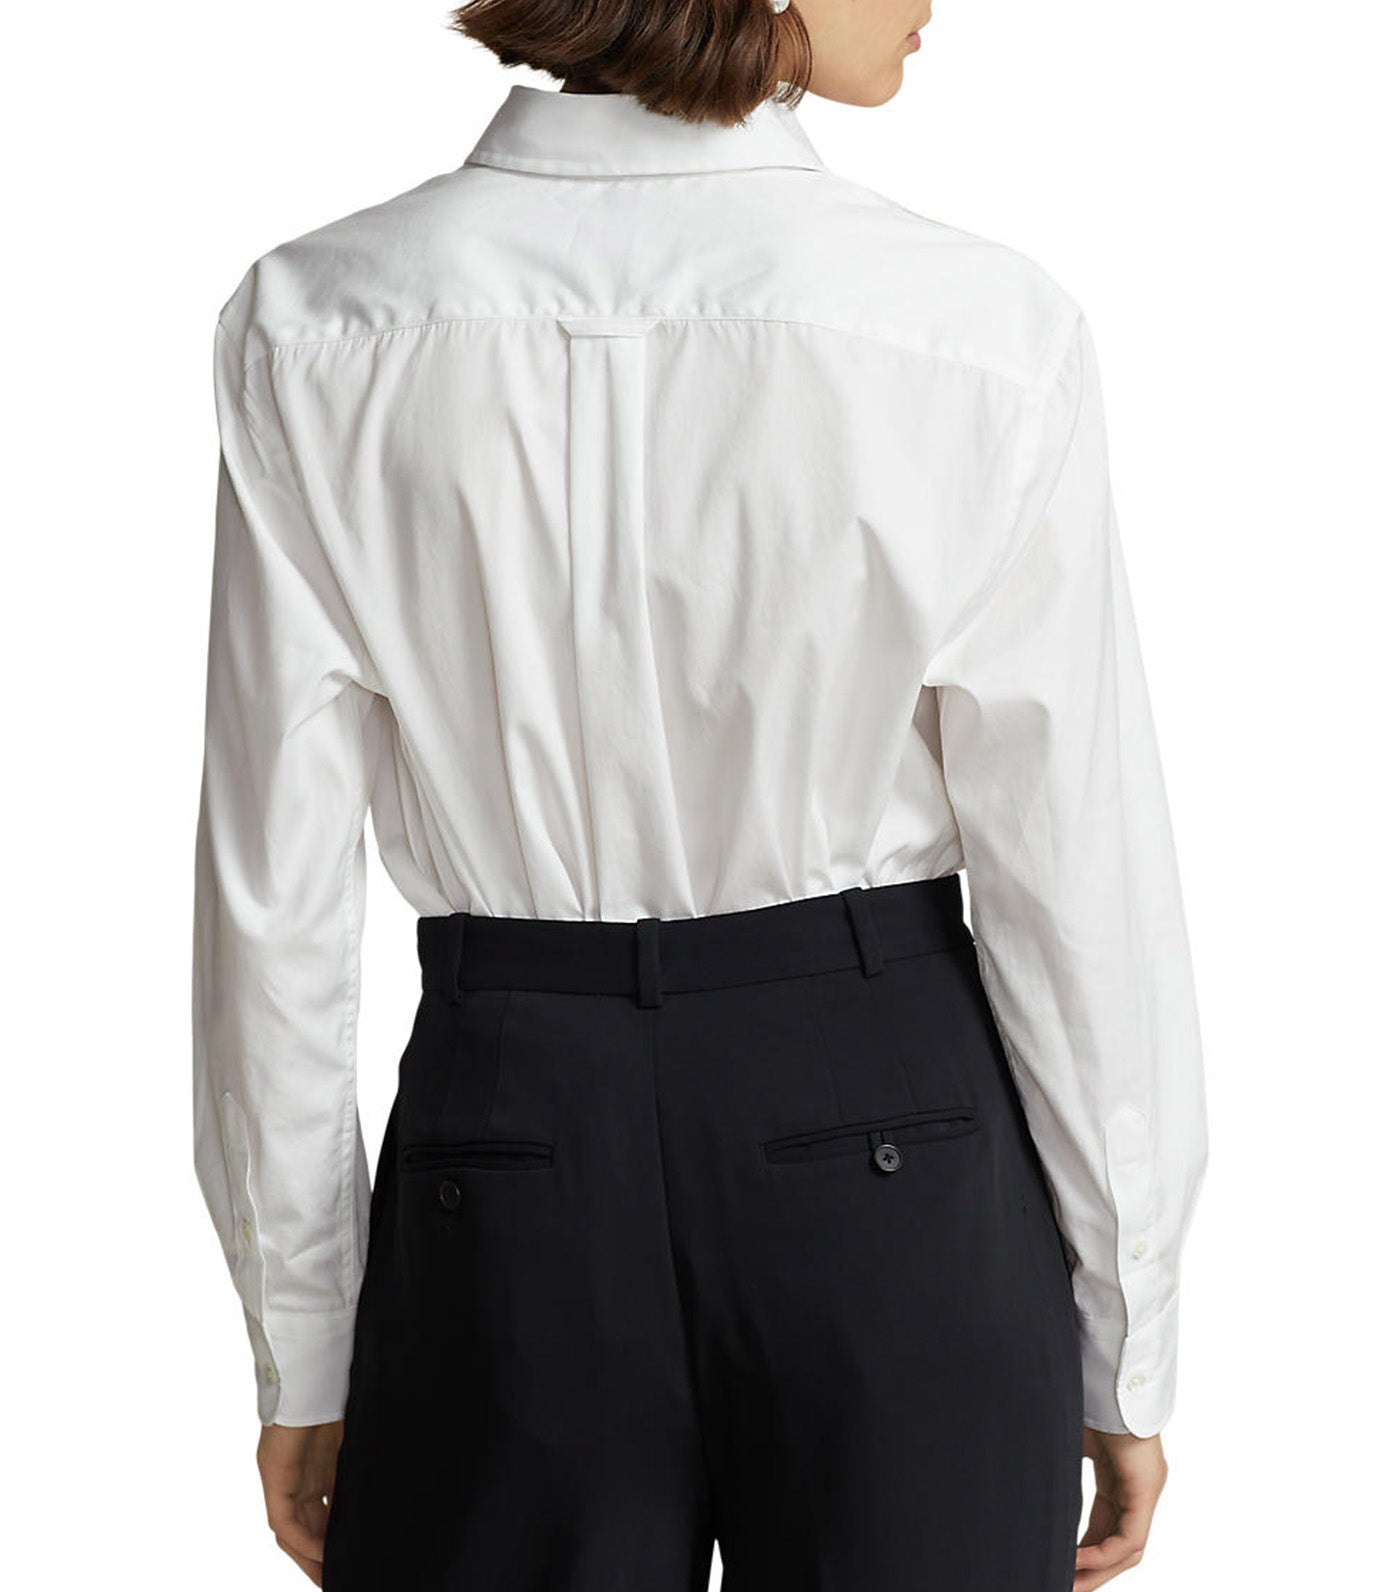 Women's Relaxed Fit Cotton Shirt White